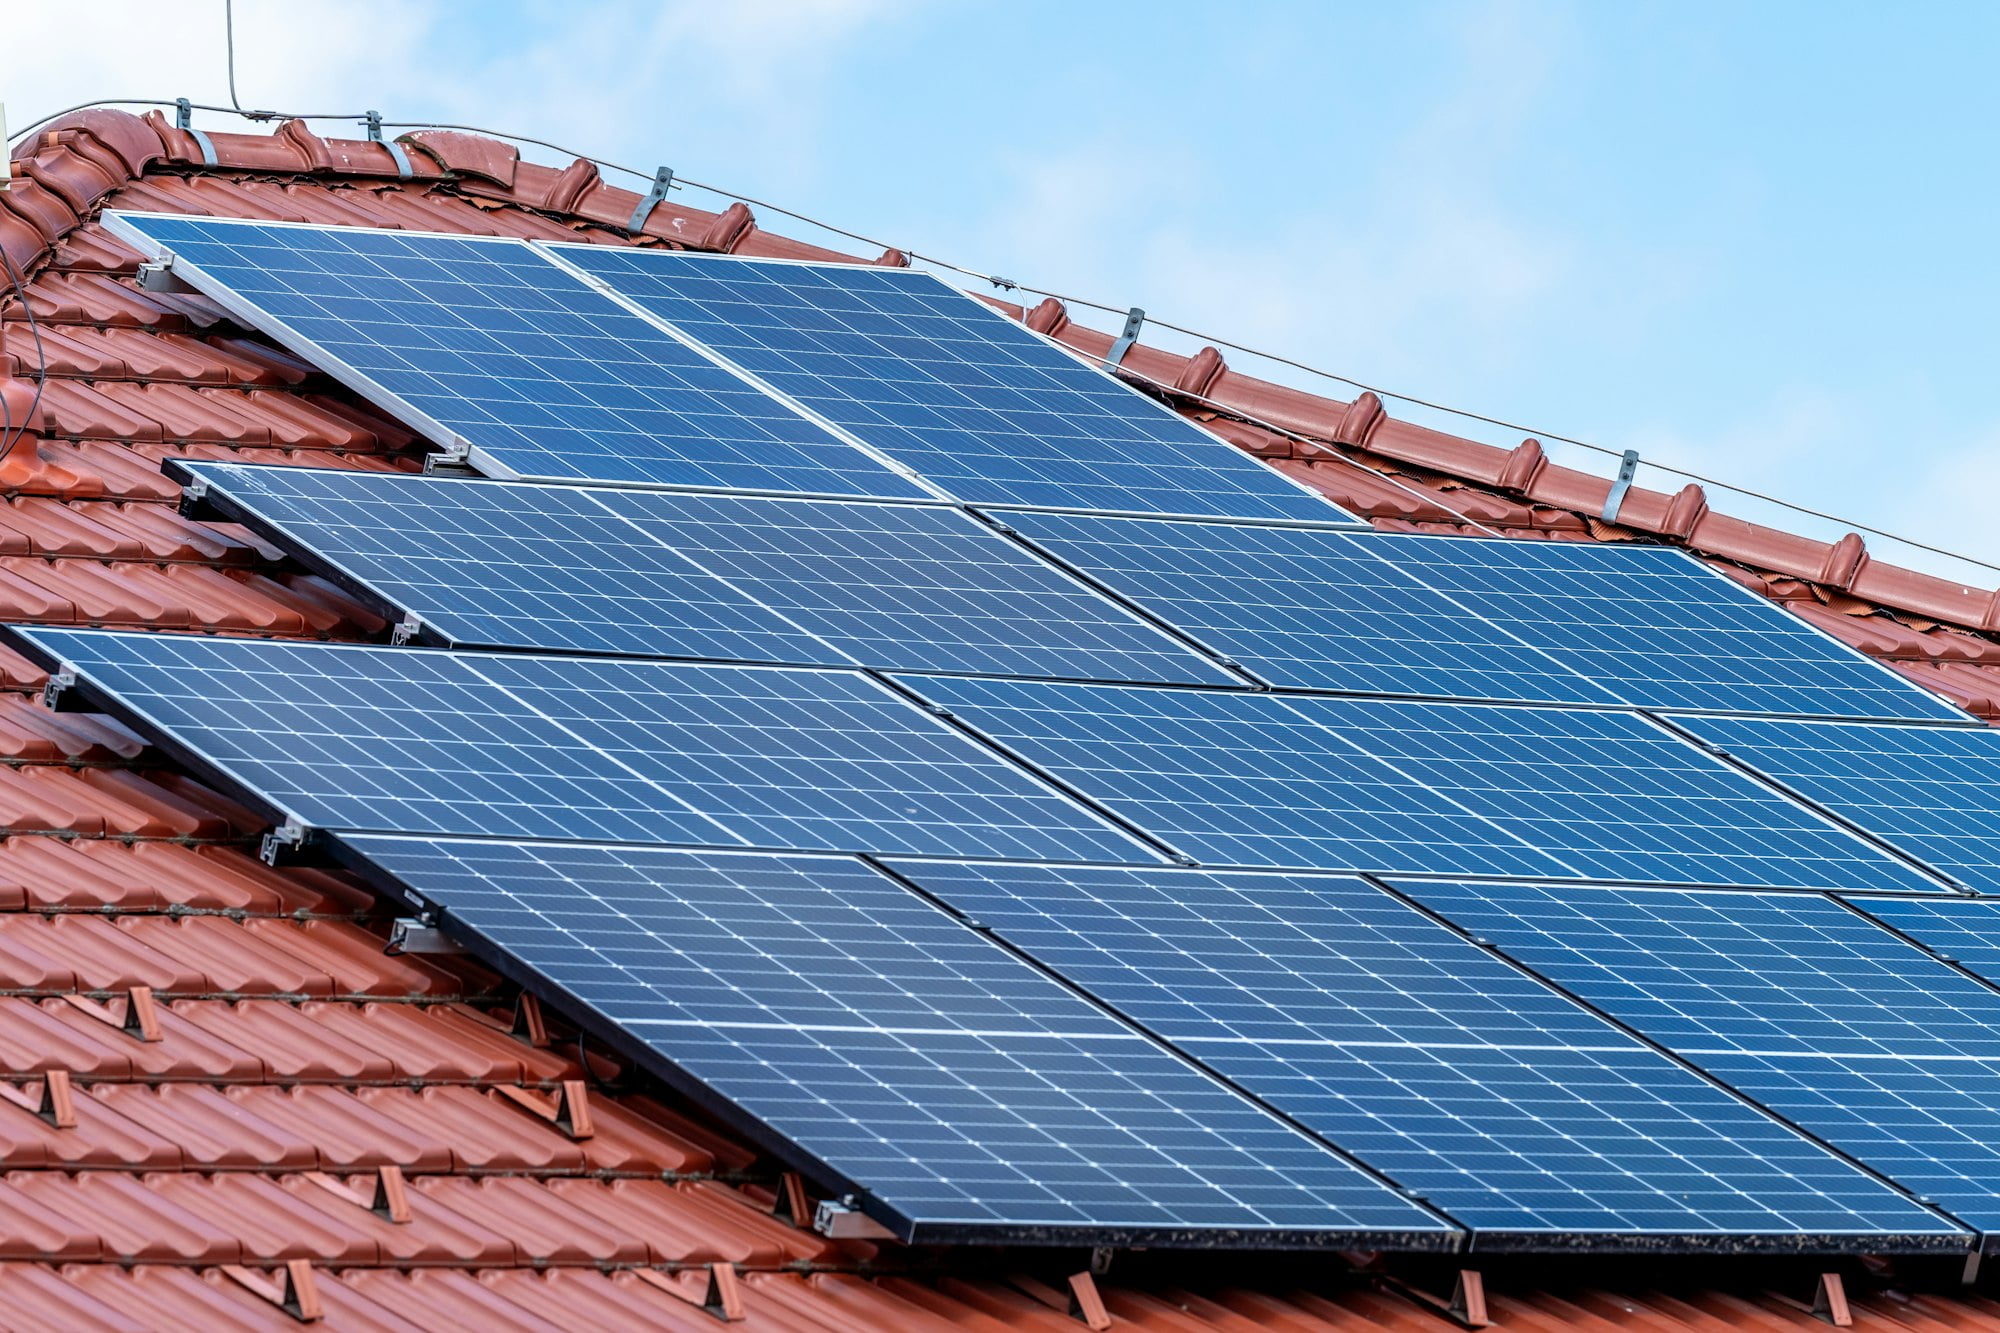 solar panels on the roof of the house to produce energy from sunlight